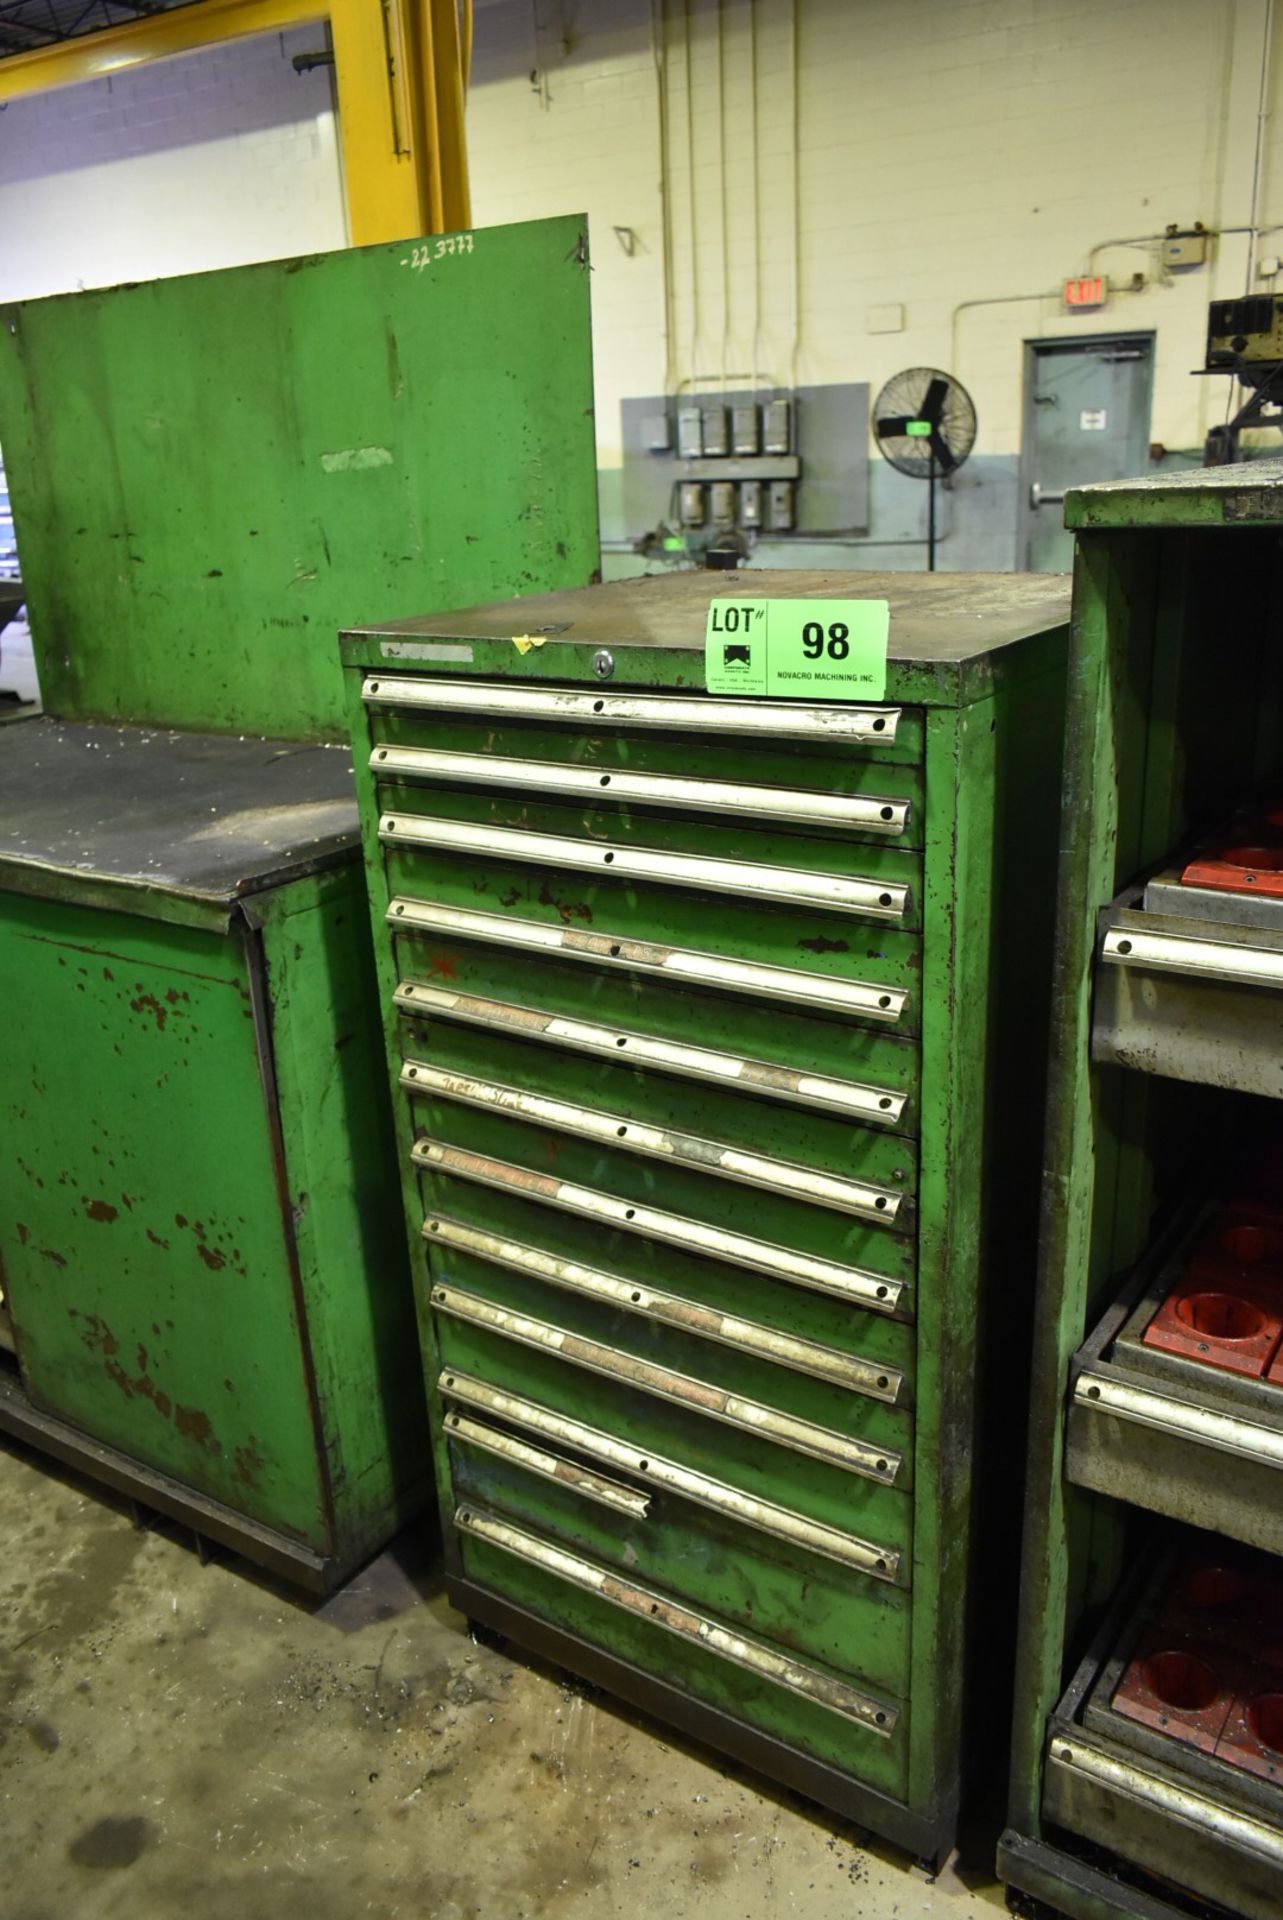 LISTA TYPE TOOL CABINET [RIGGING FEE FOR LOT#98 - $25 USD PLUS APPLICABLE TAXES]